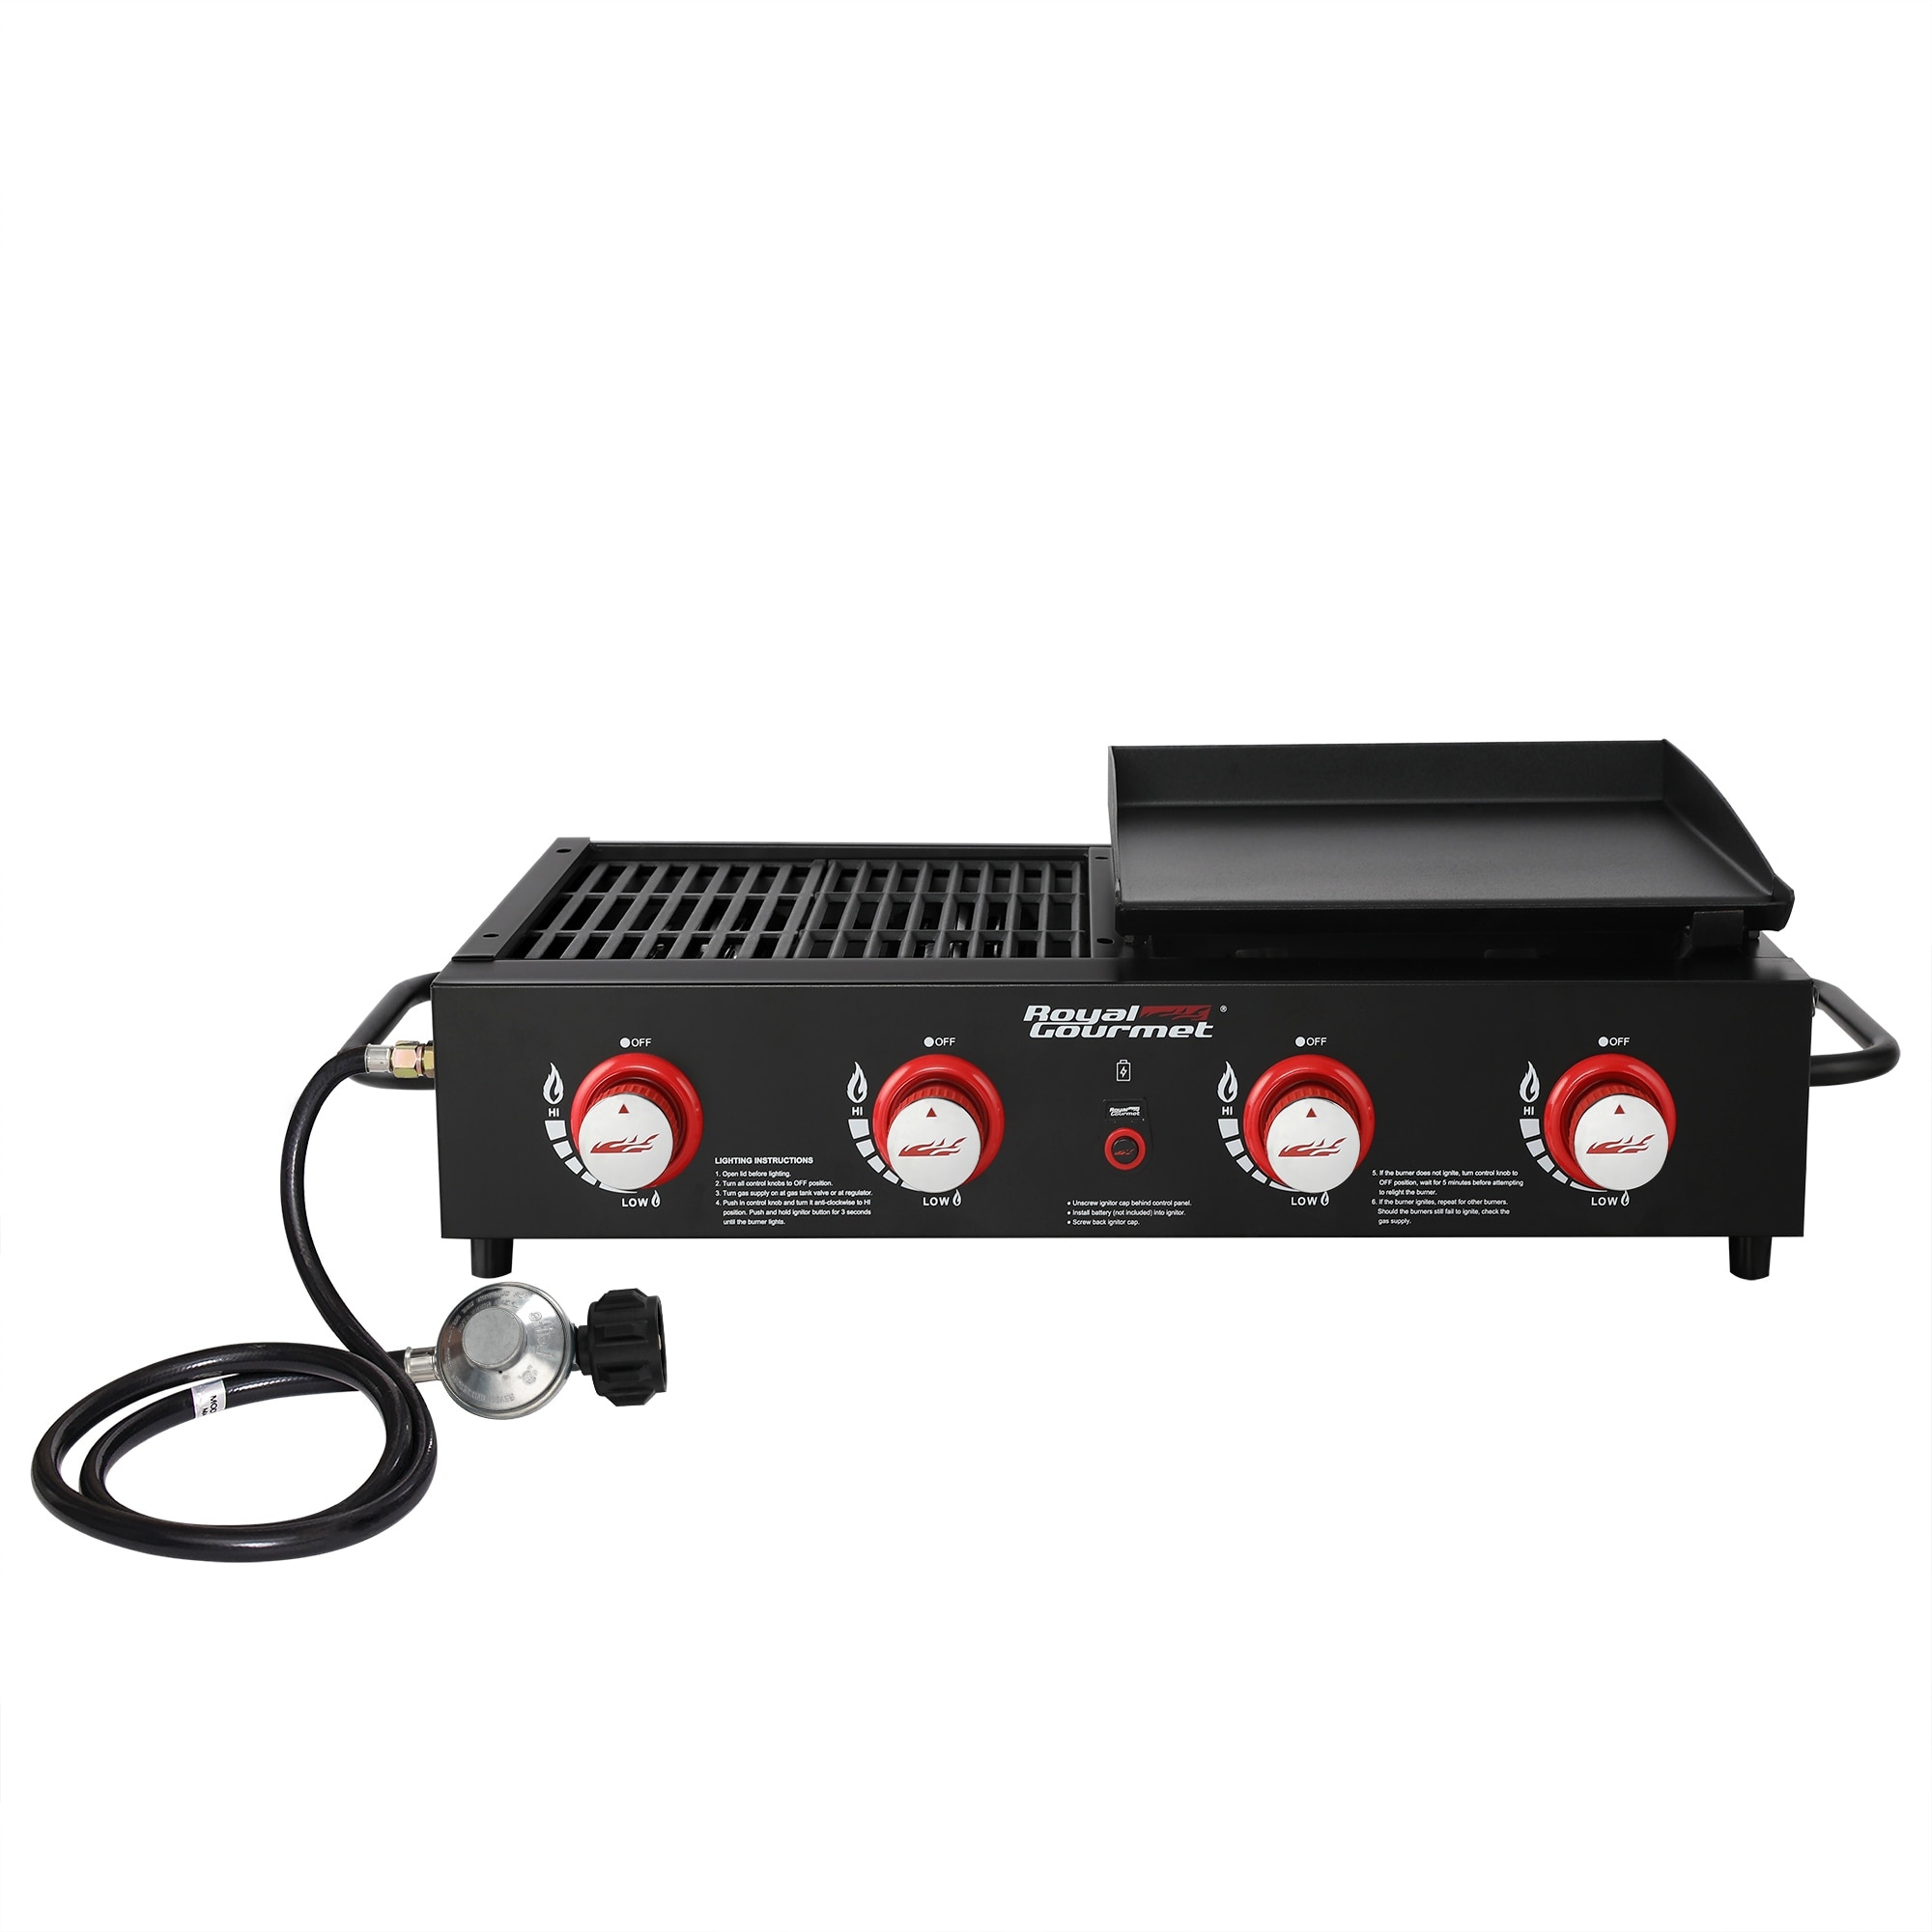 Royal Gourmet Portable Gas Grill 3-Burner Tabletop Griddle Outdoor BBQ  Camping